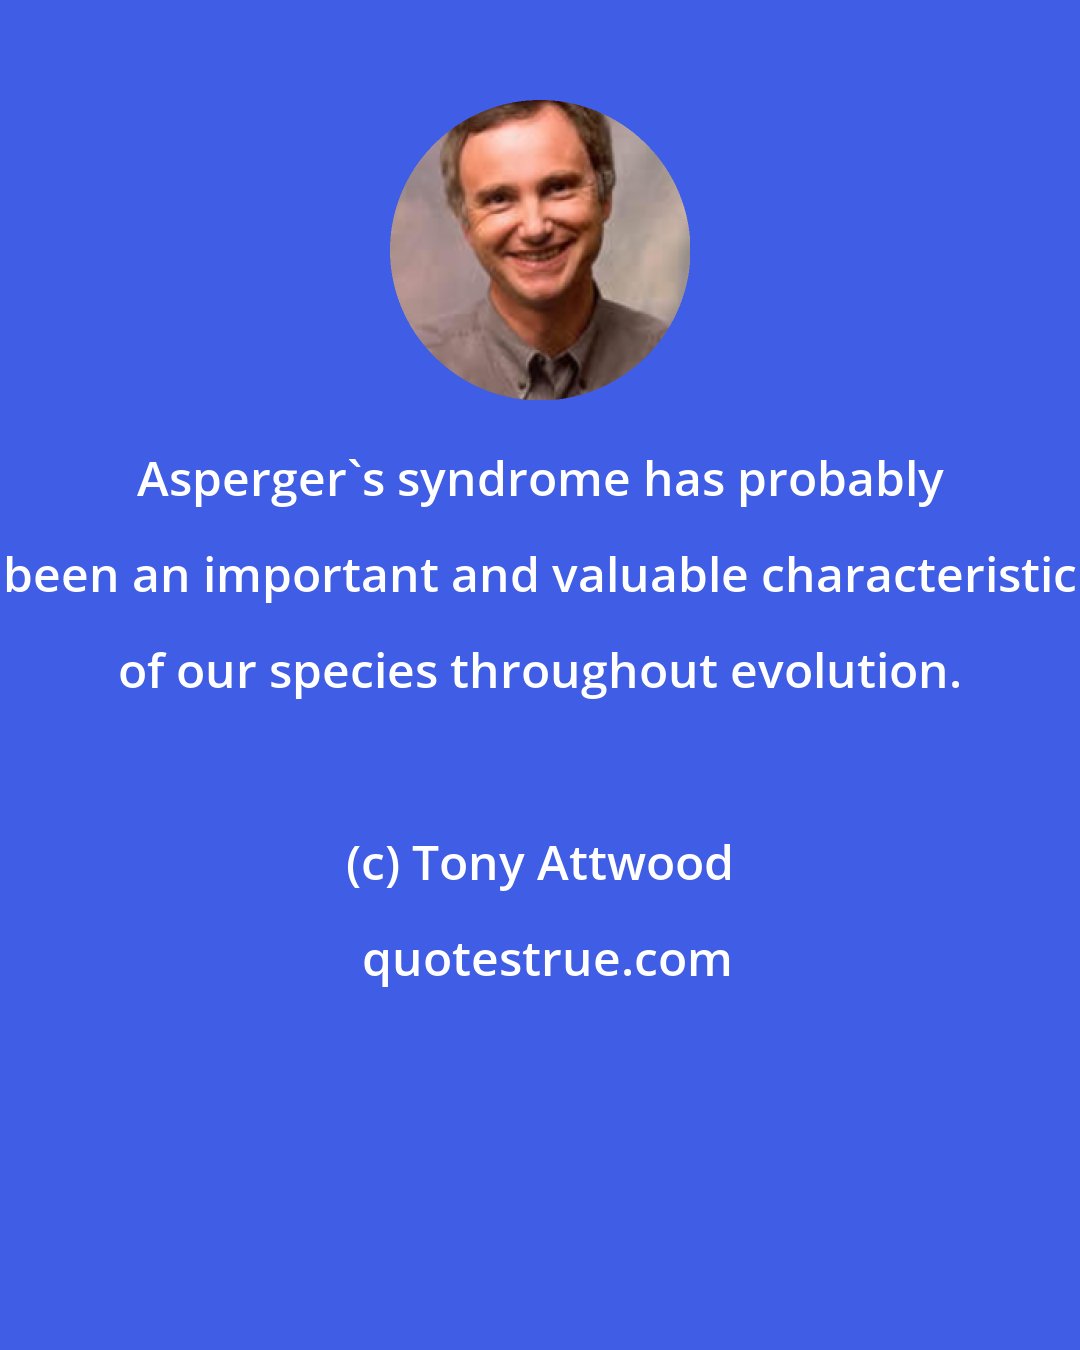 Tony Attwood: Asperger's syndrome has probably been an important and valuable characteristic of our species throughout evolution.